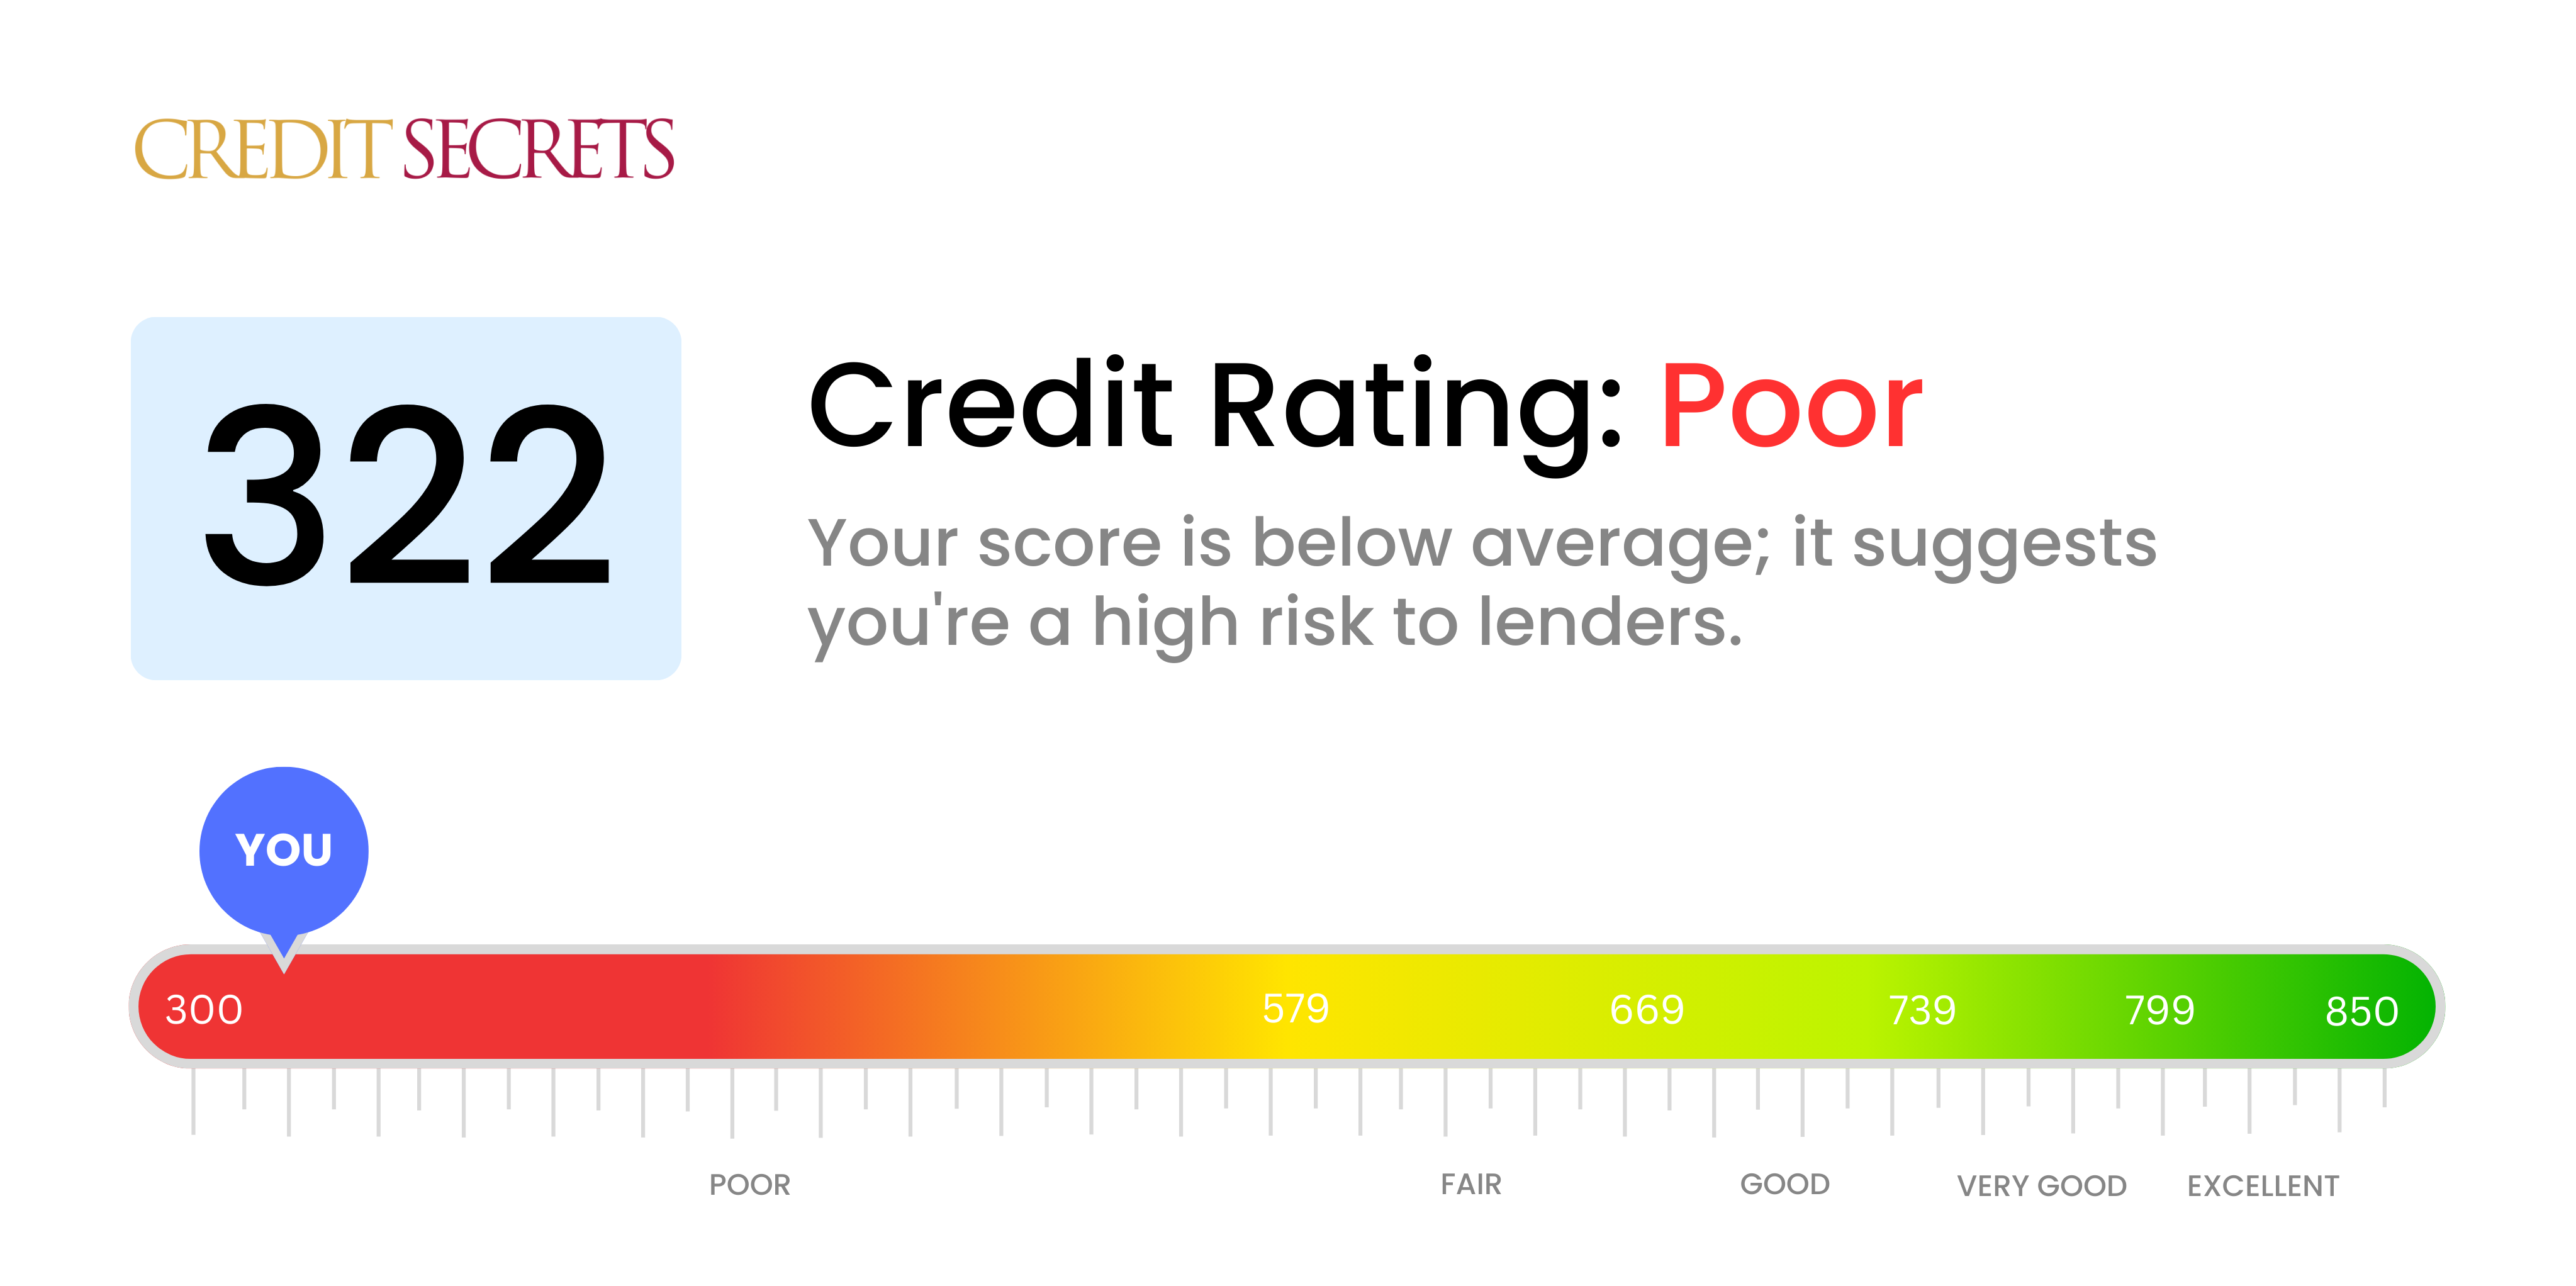 Is 322 a good credit score?